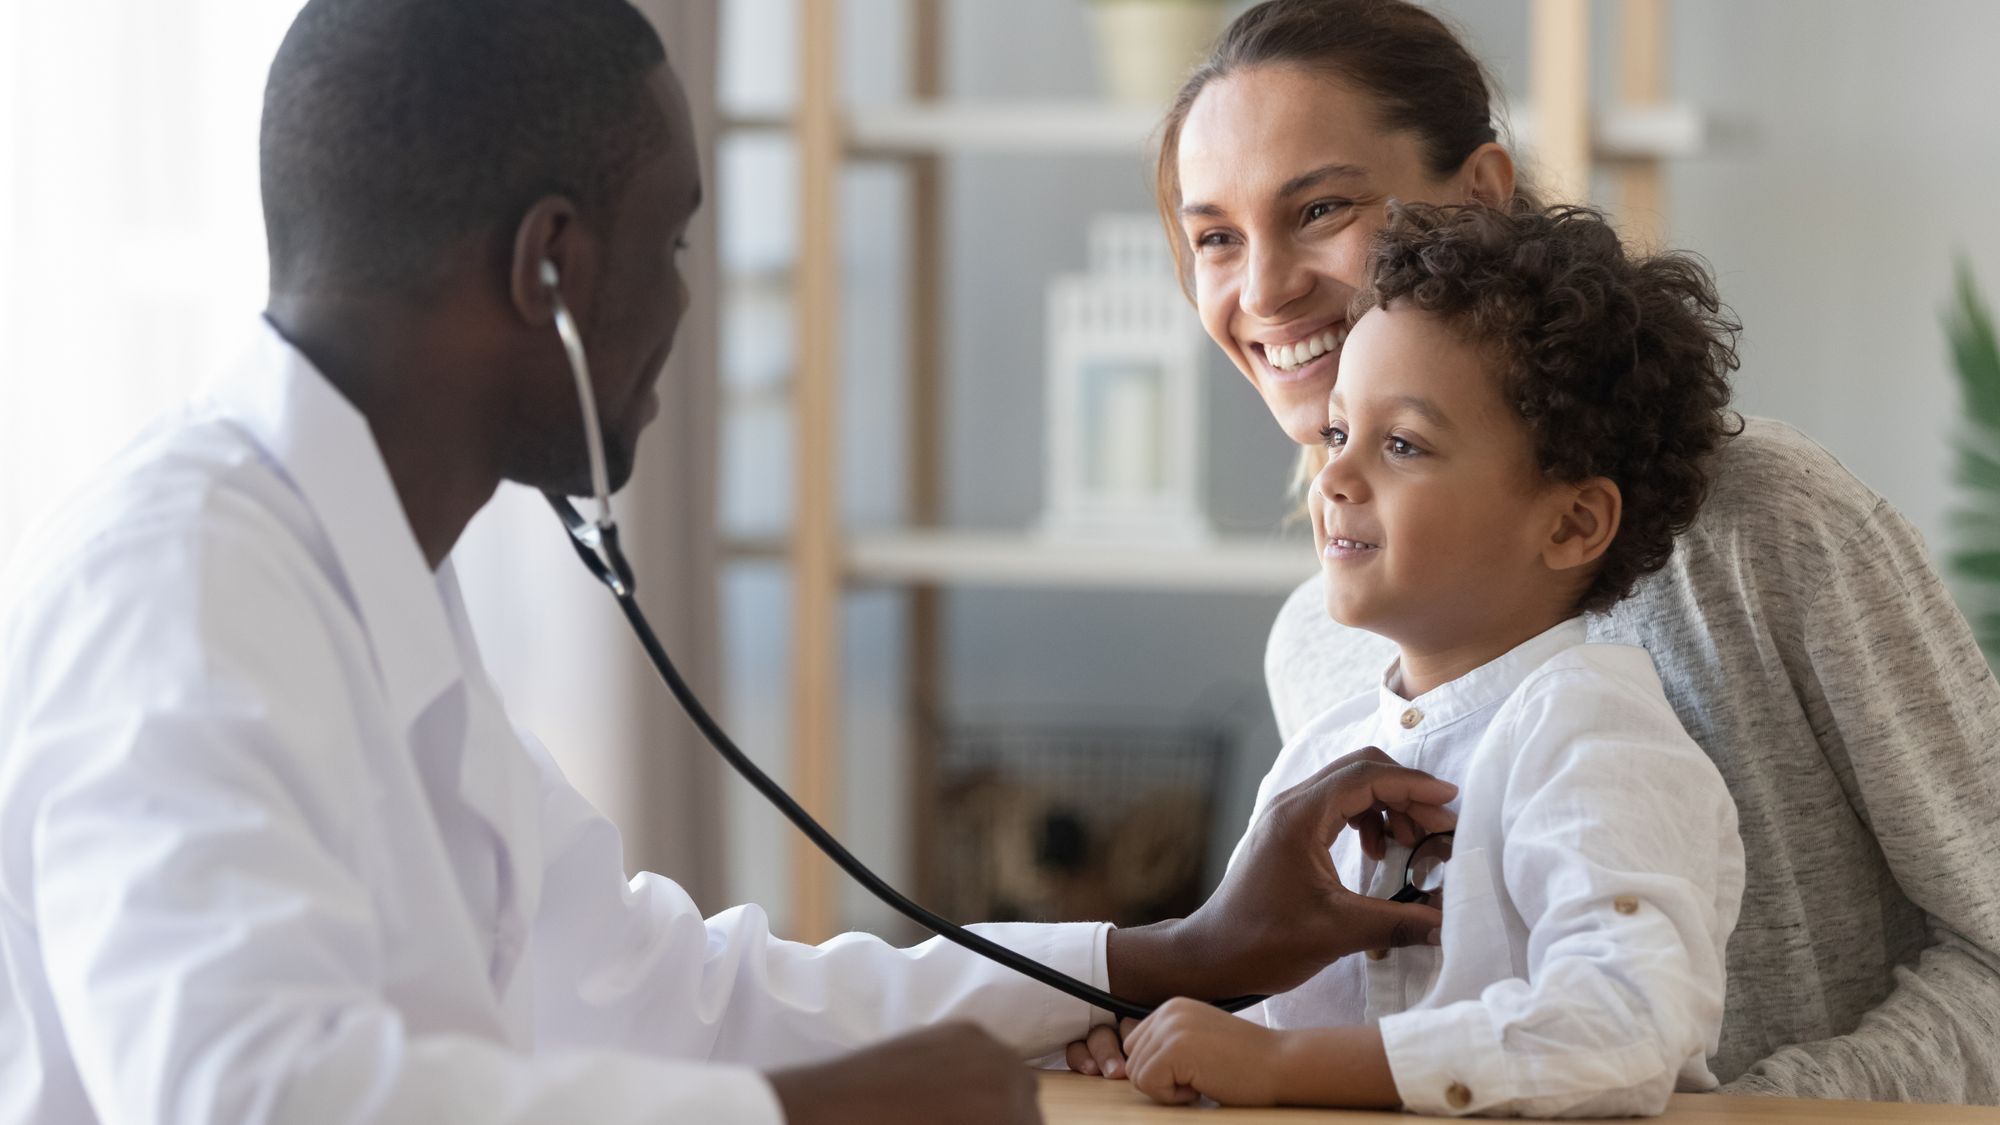 How to Choose a Family Doctor